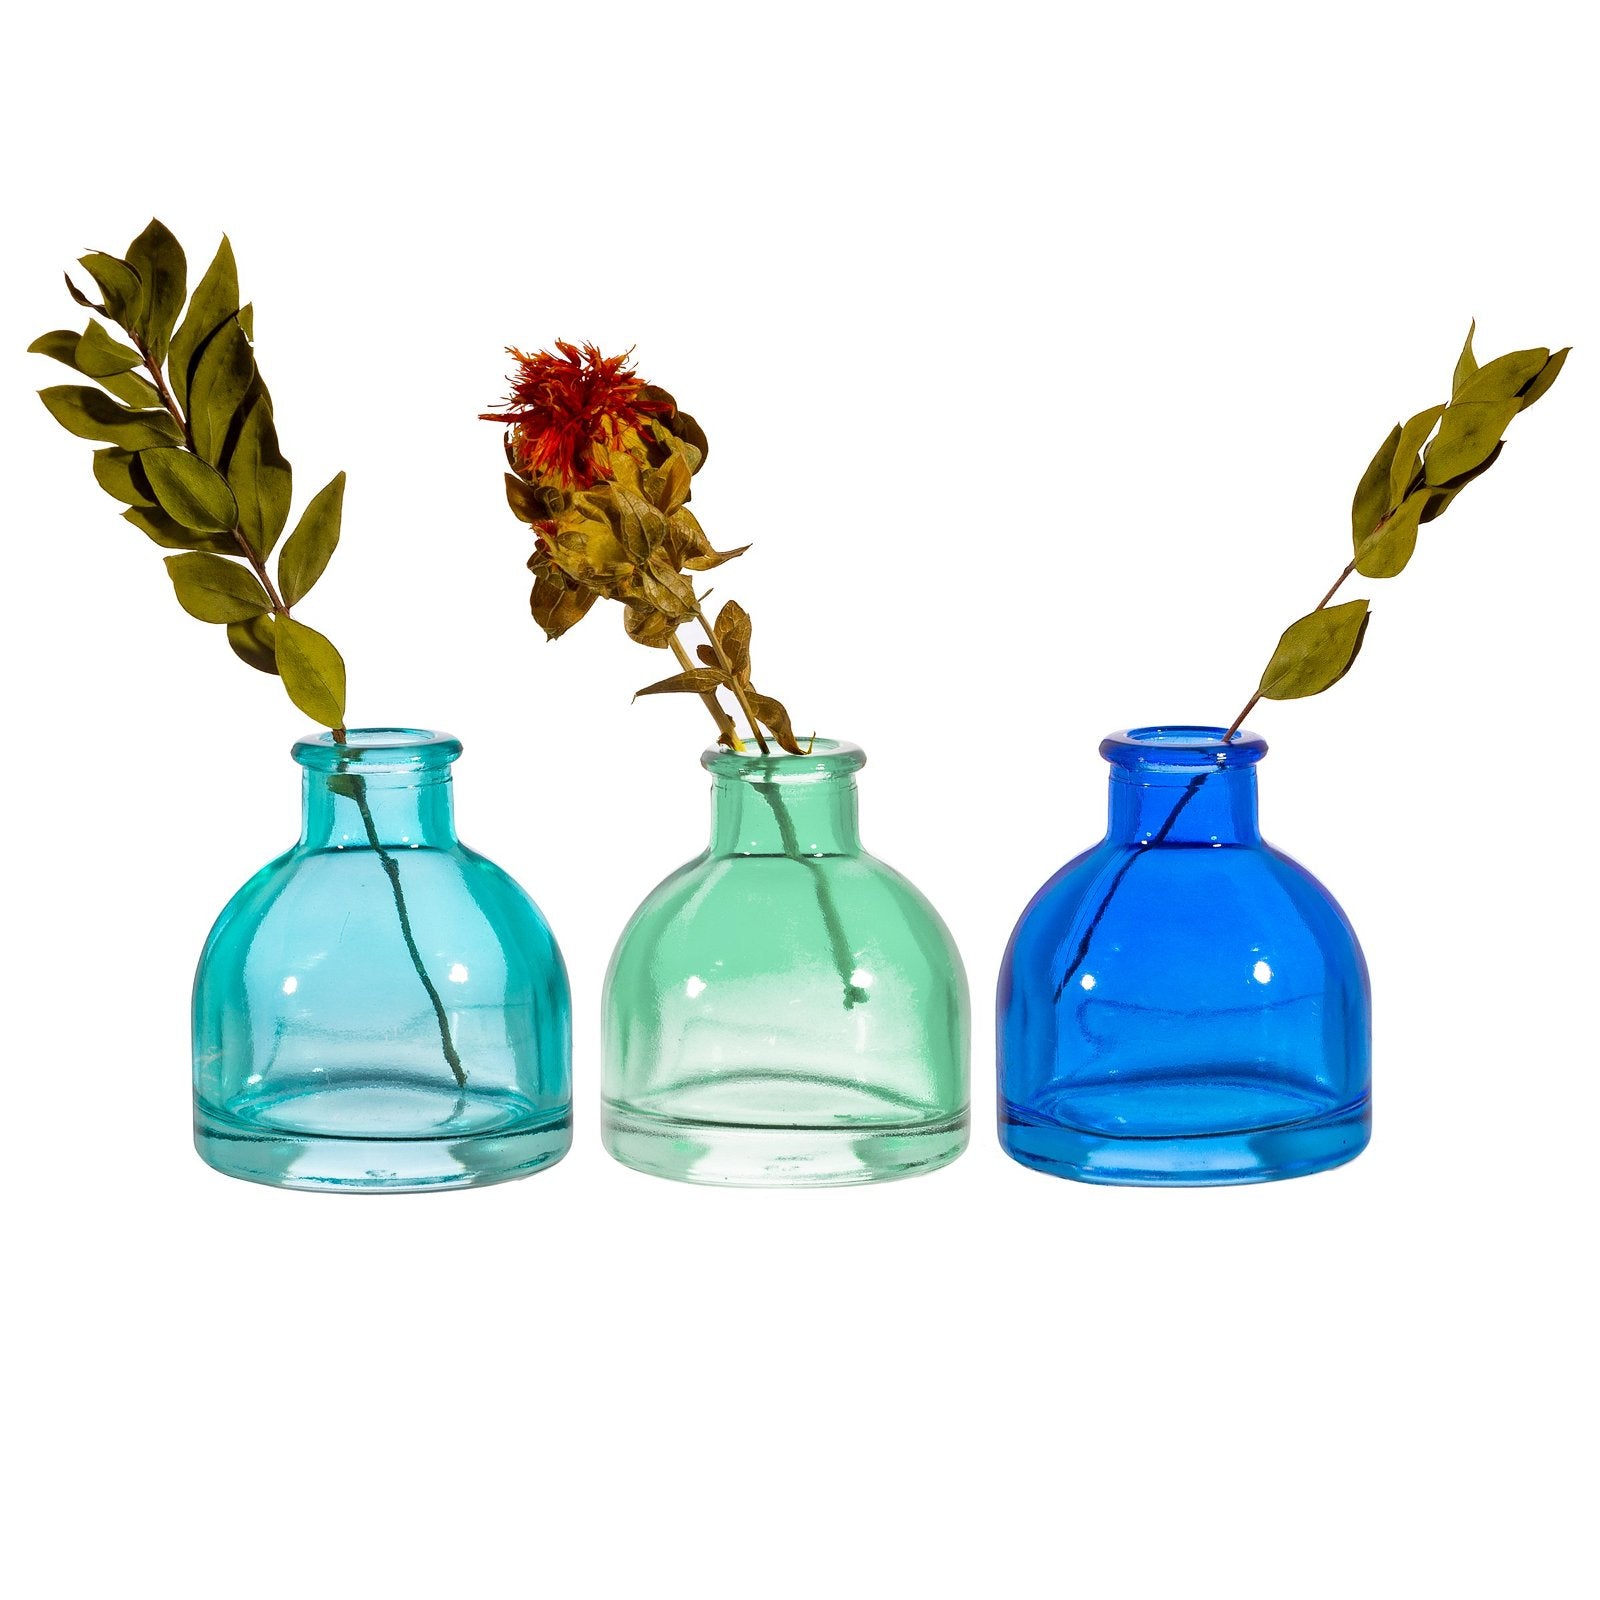 View Cool Toned Mini Bud Vases Set of 3 information